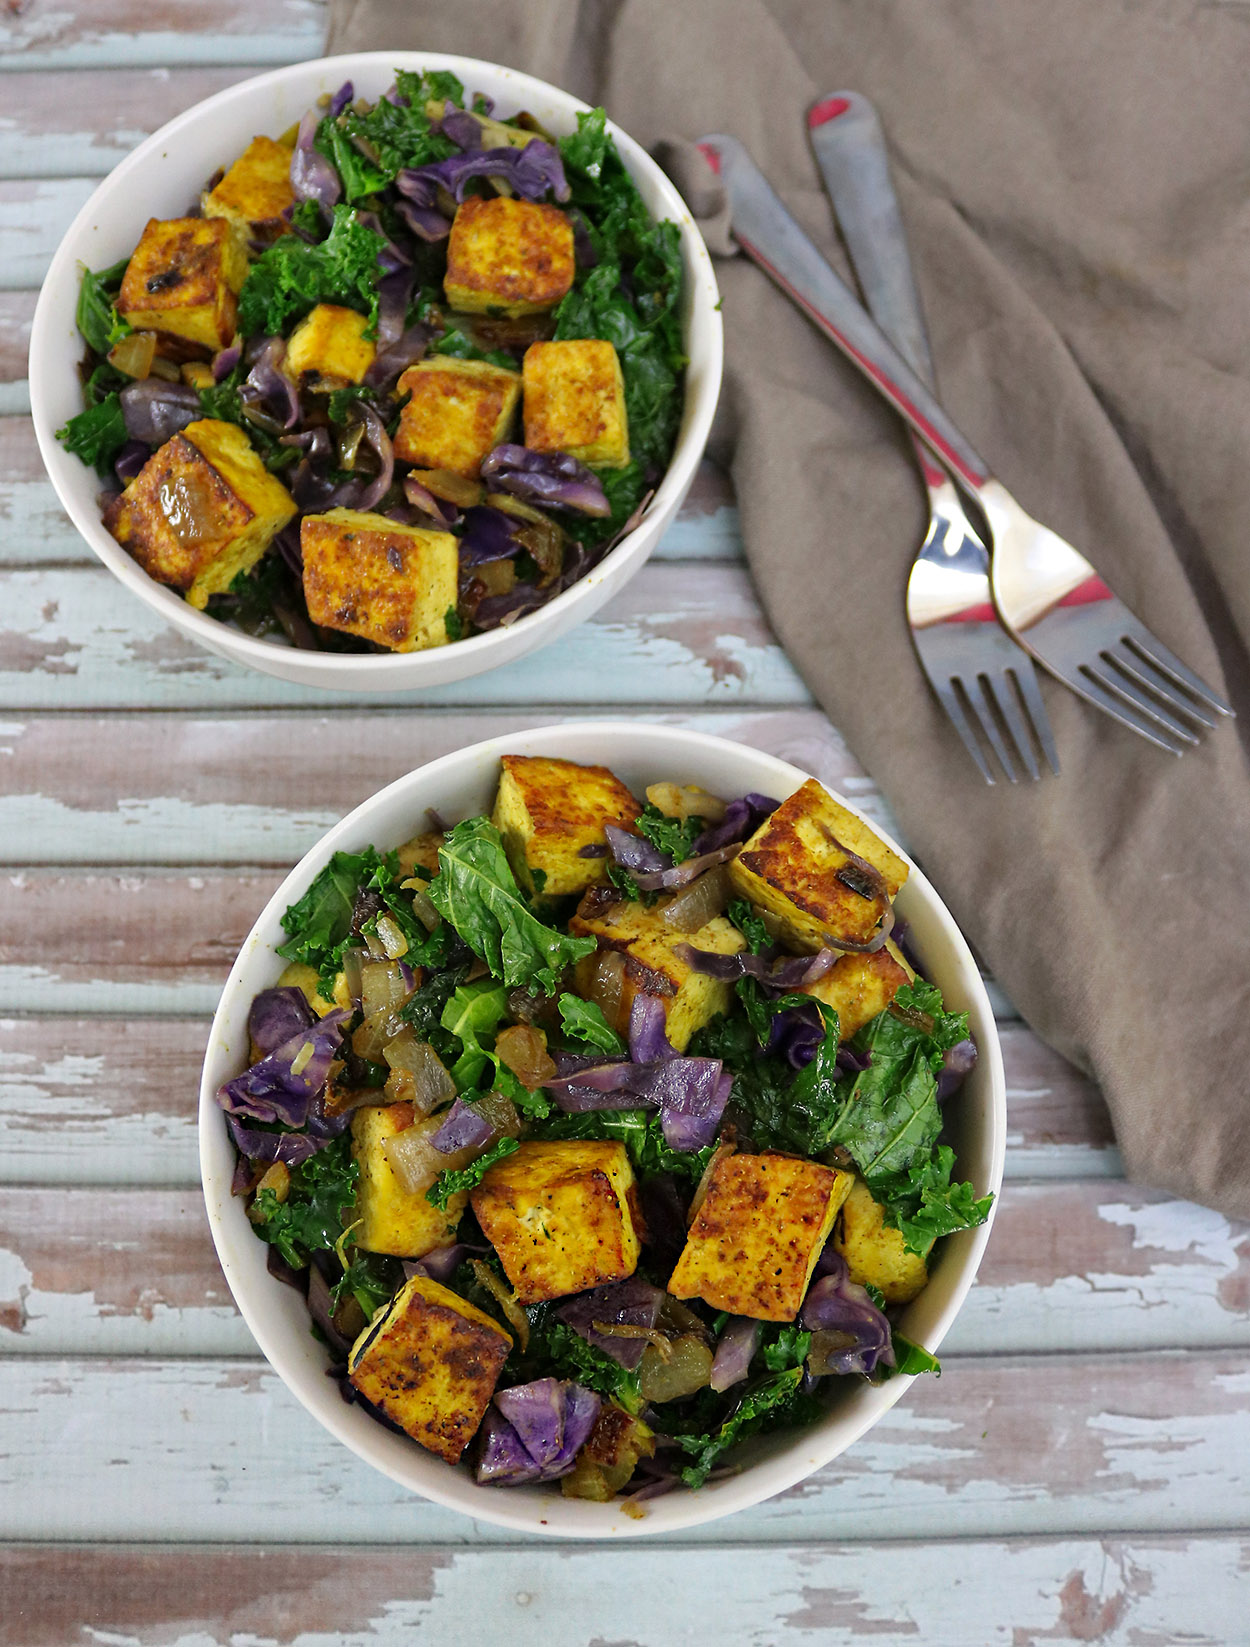 Spiced Tofu with Kale and Cabbage salad